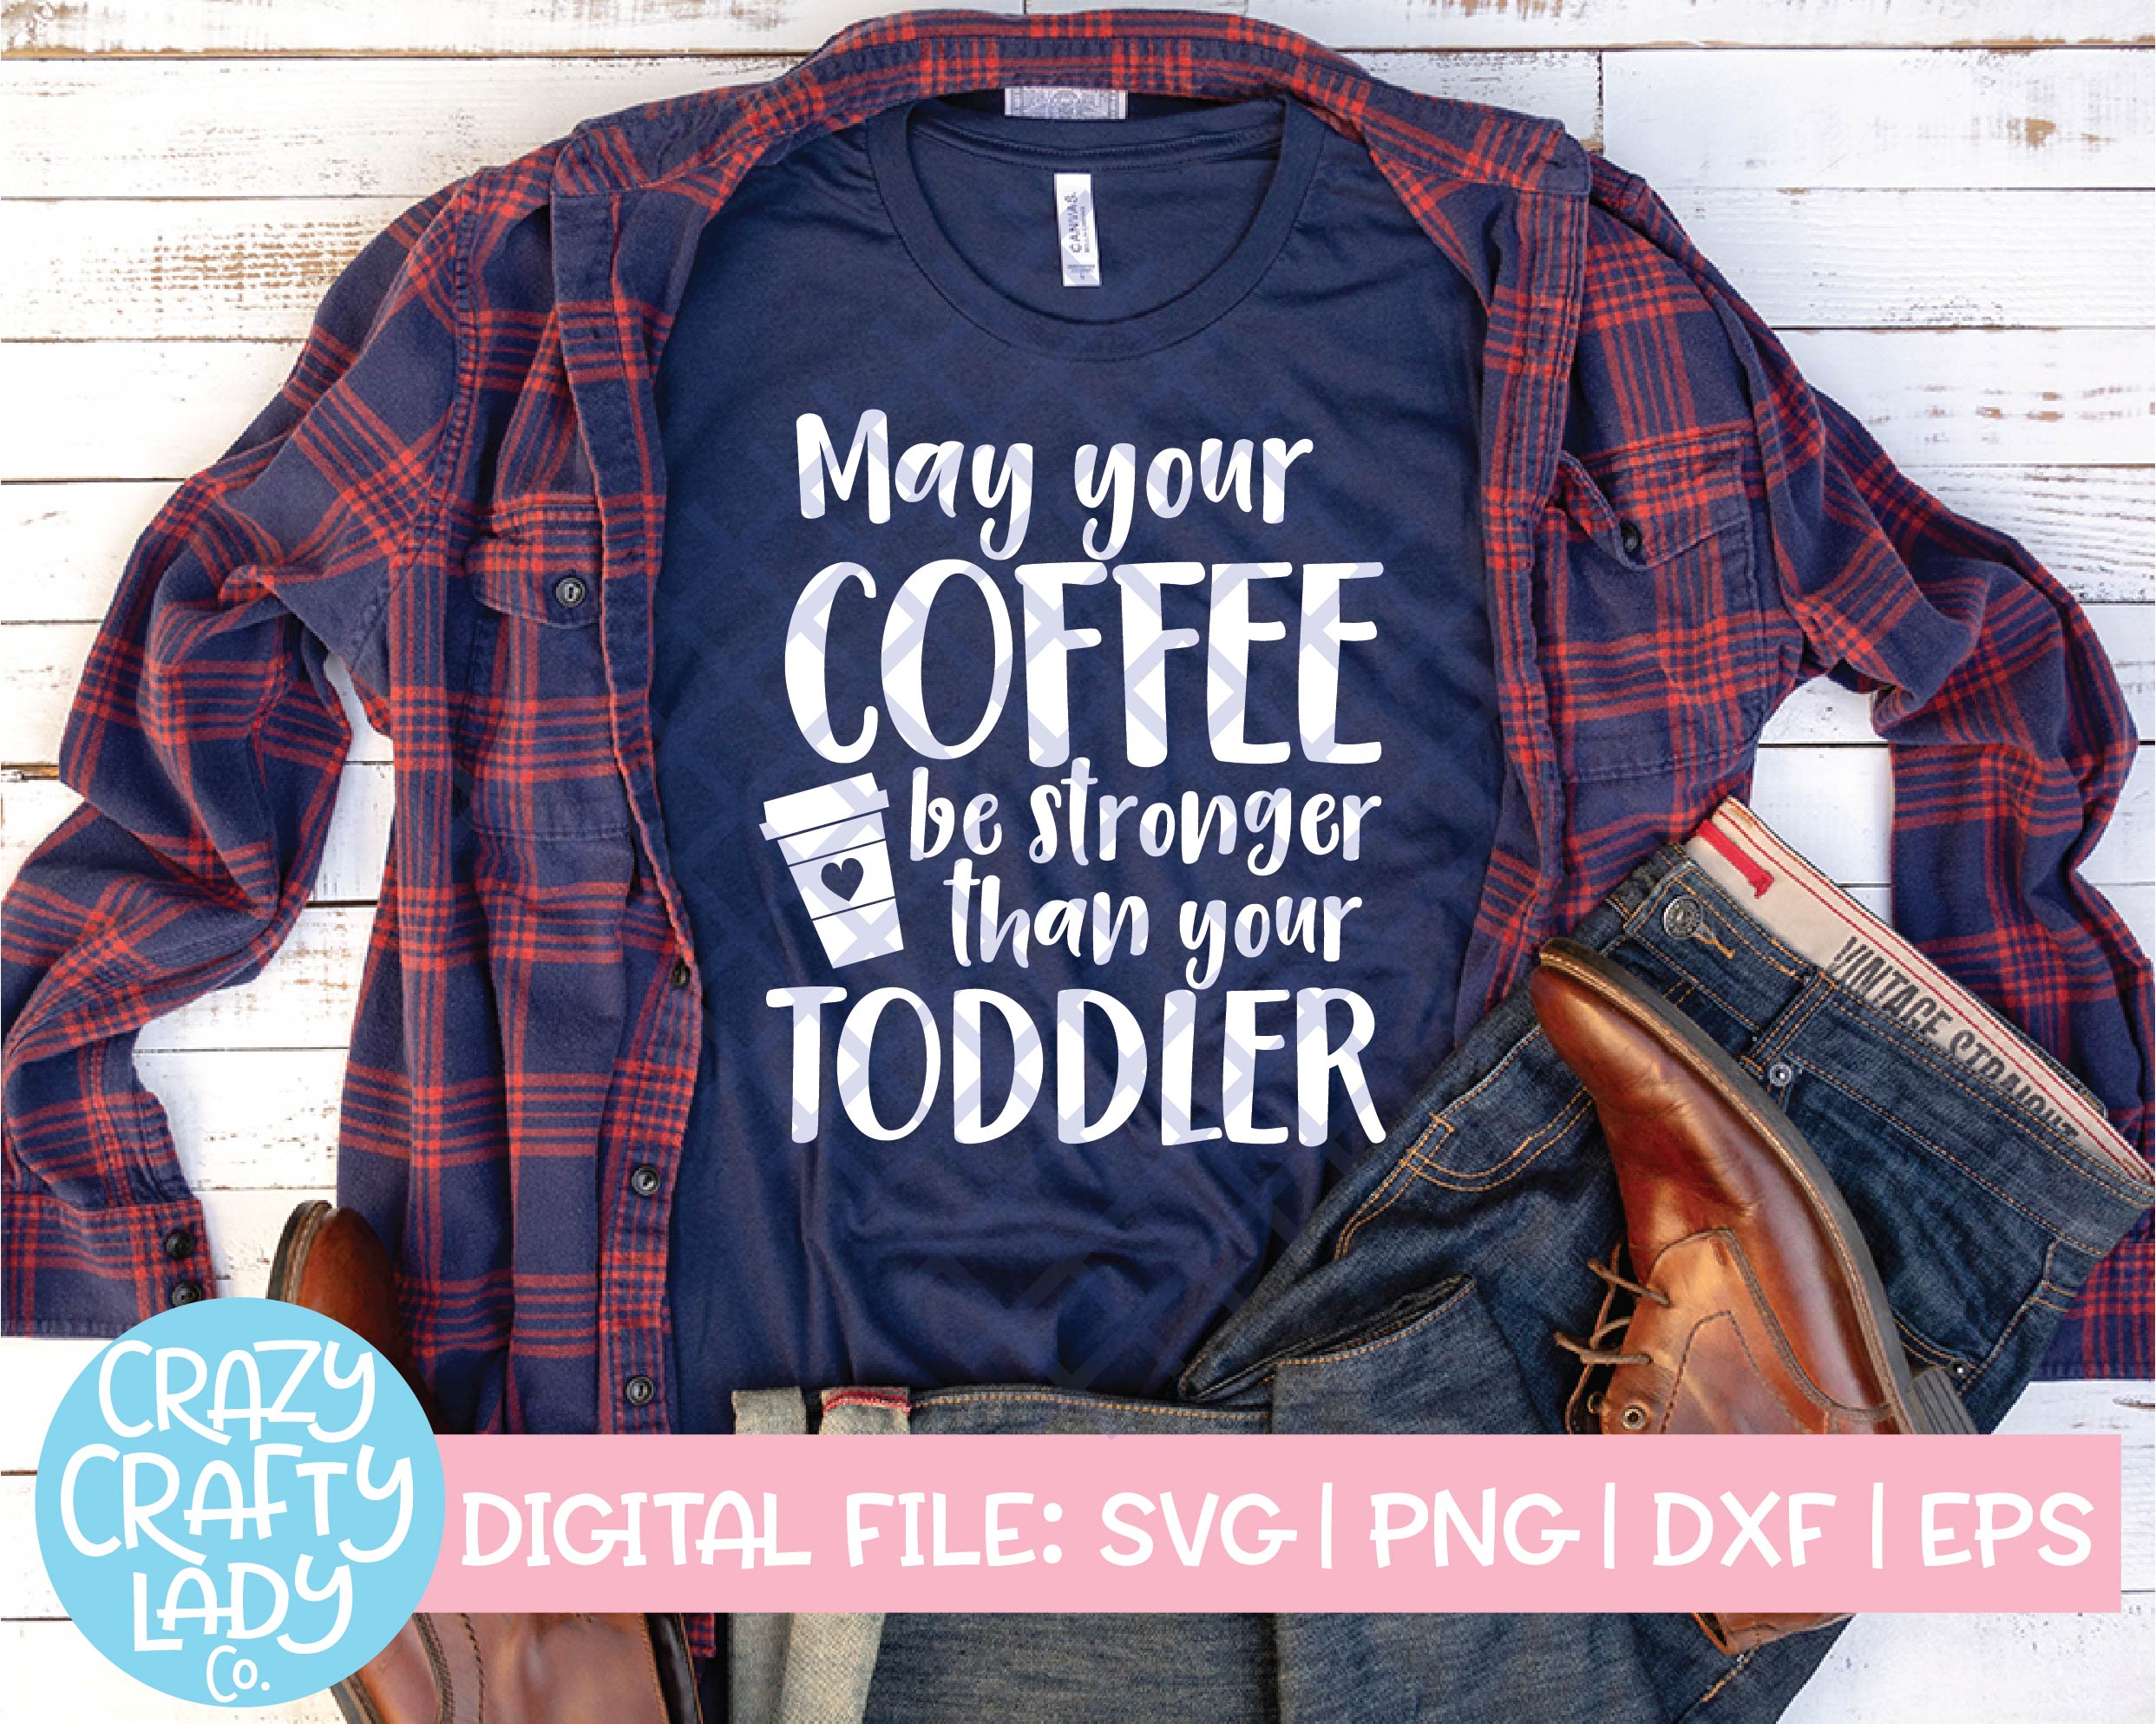 Download May Your Coffee Be Stronger Than Your Toddler Svg Cut File Crazy Crafty Lady Co